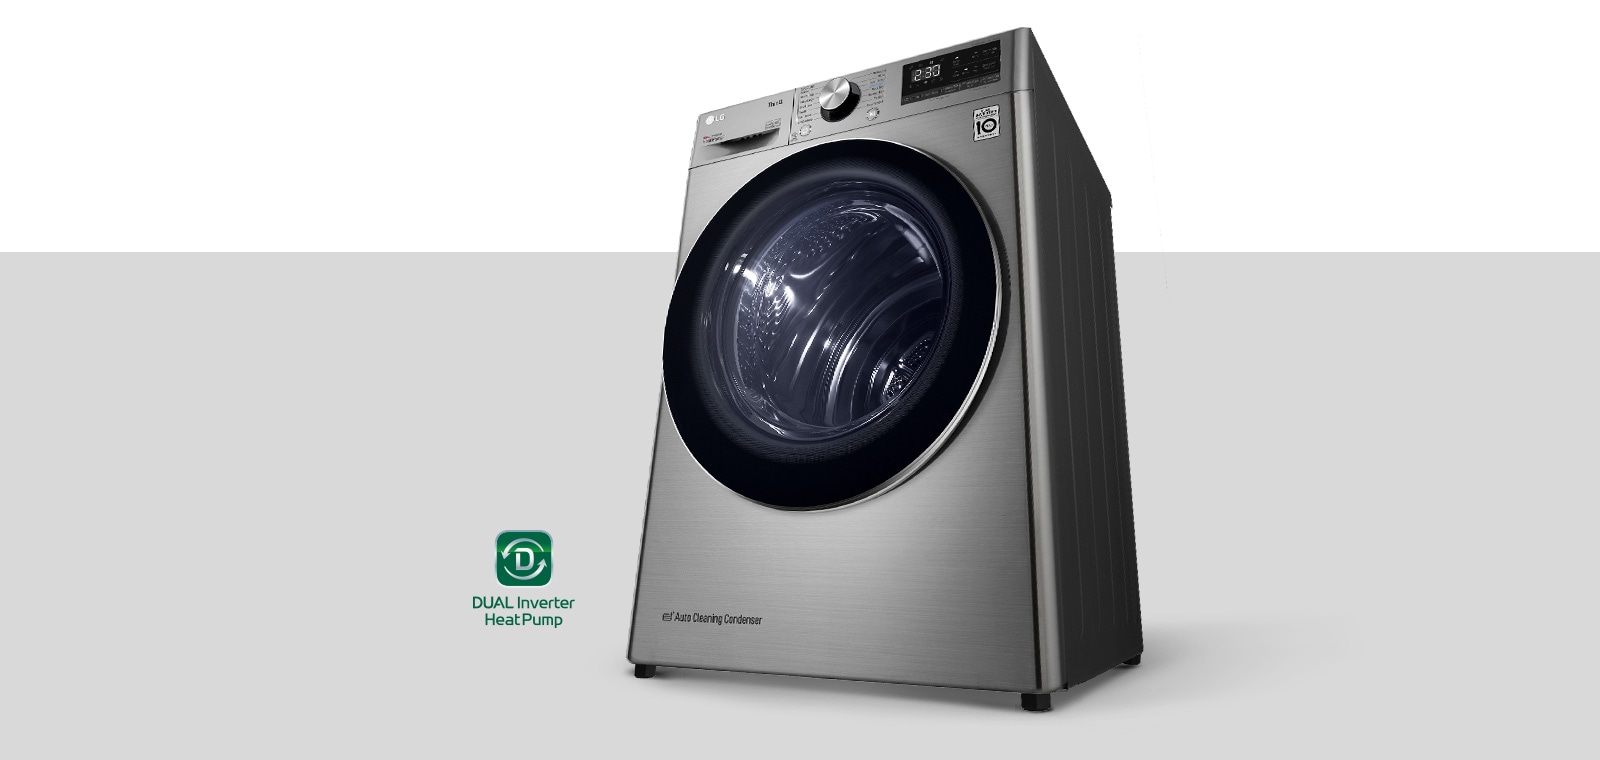 DUAL Inverter Heat Pump™ Dryer product image with logo